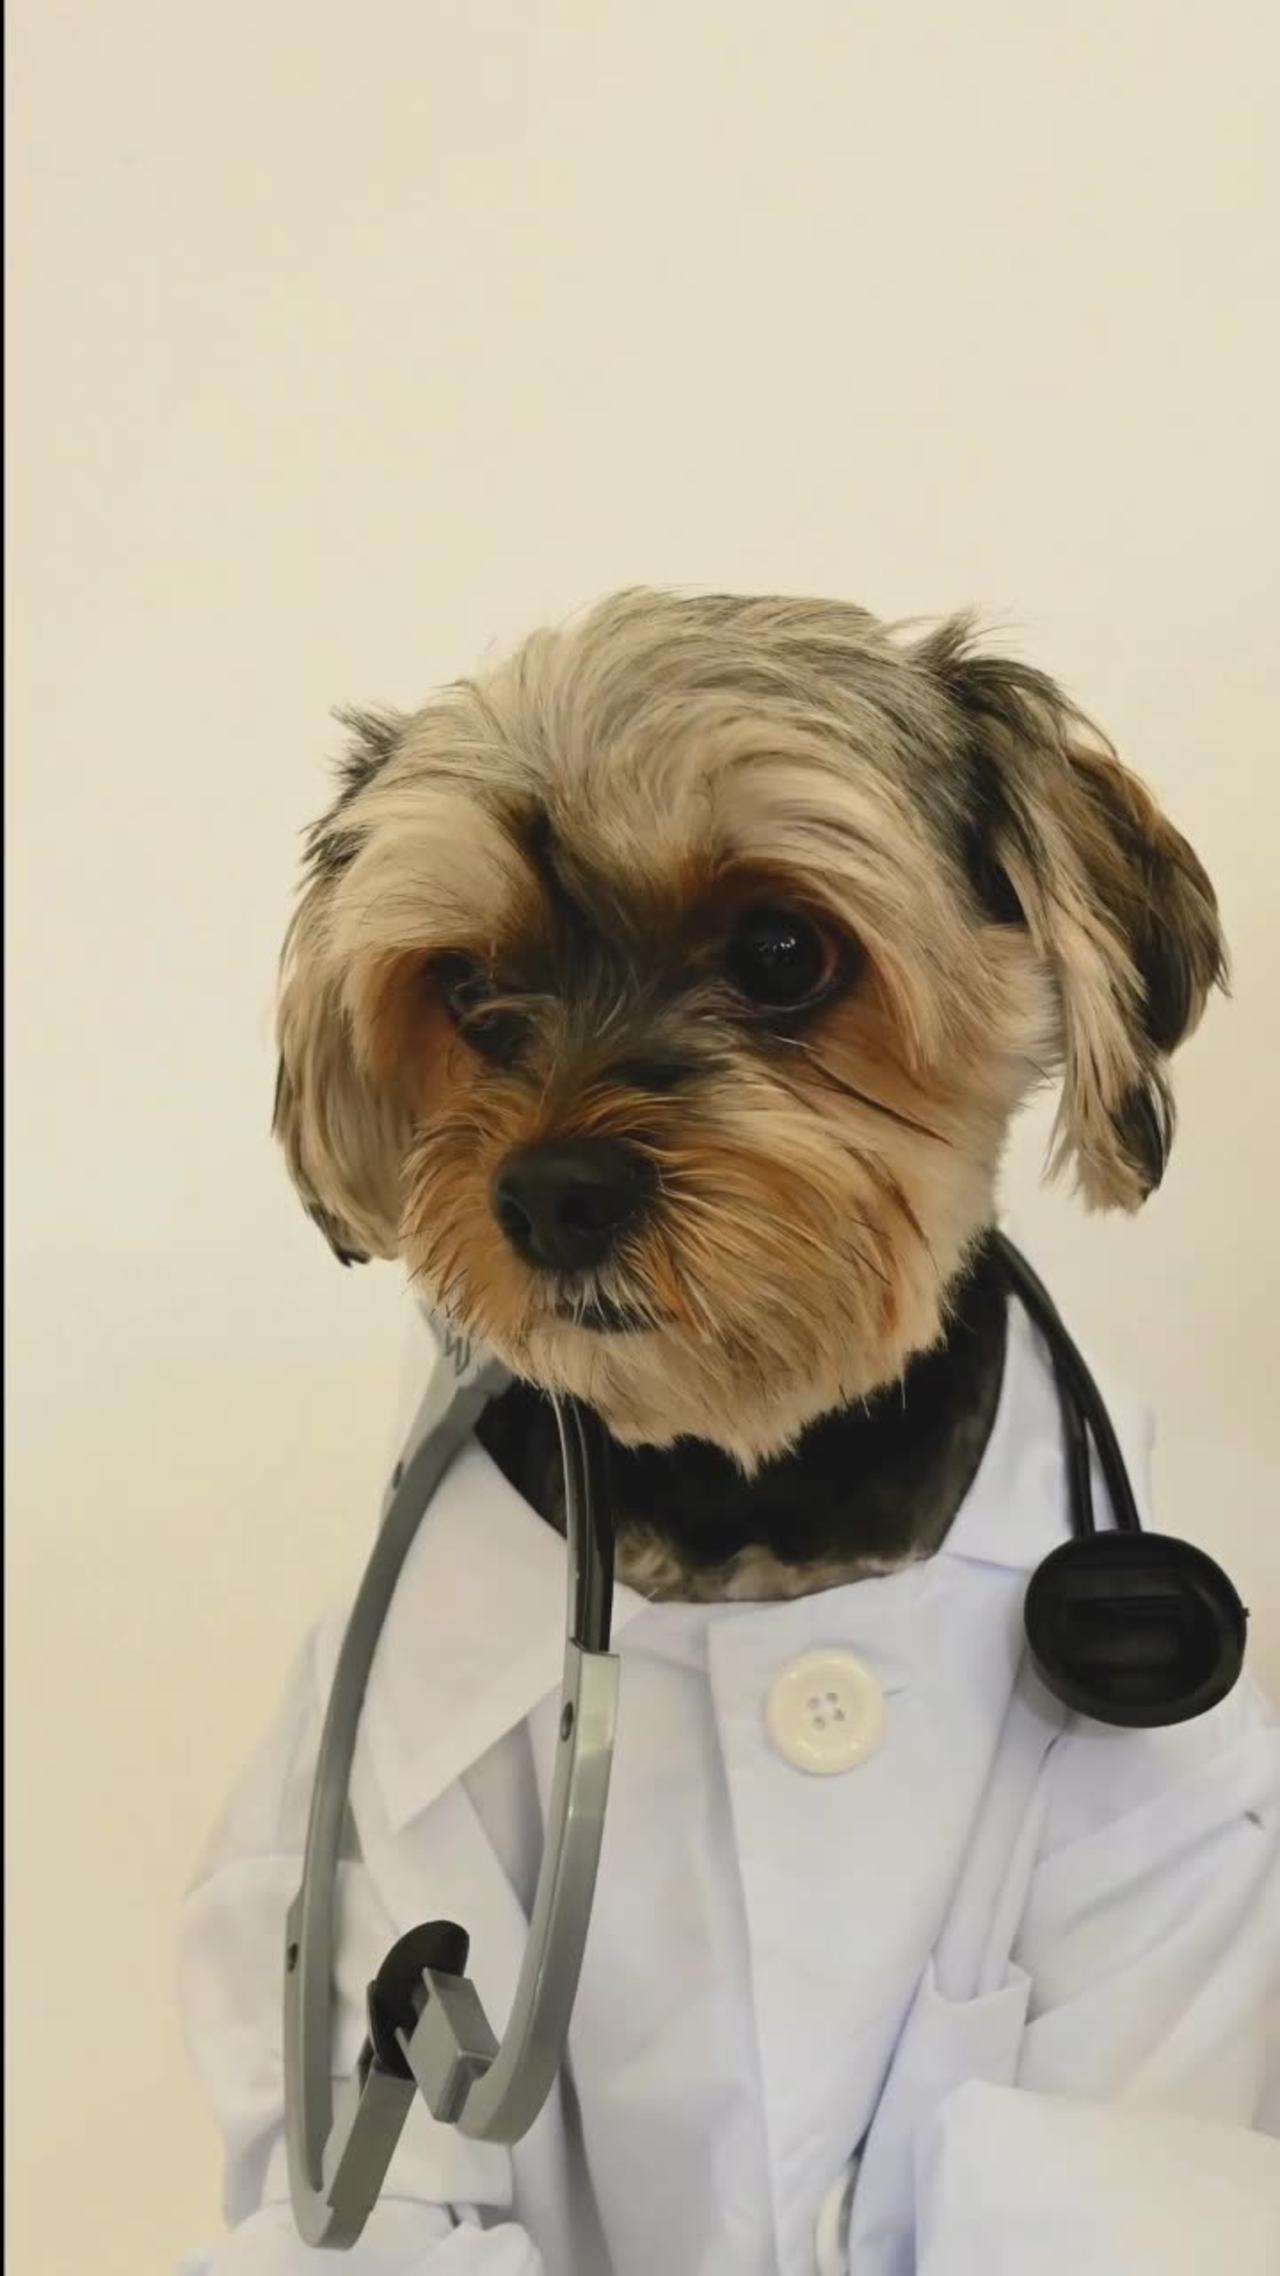 doctor funny dog amazing viral video